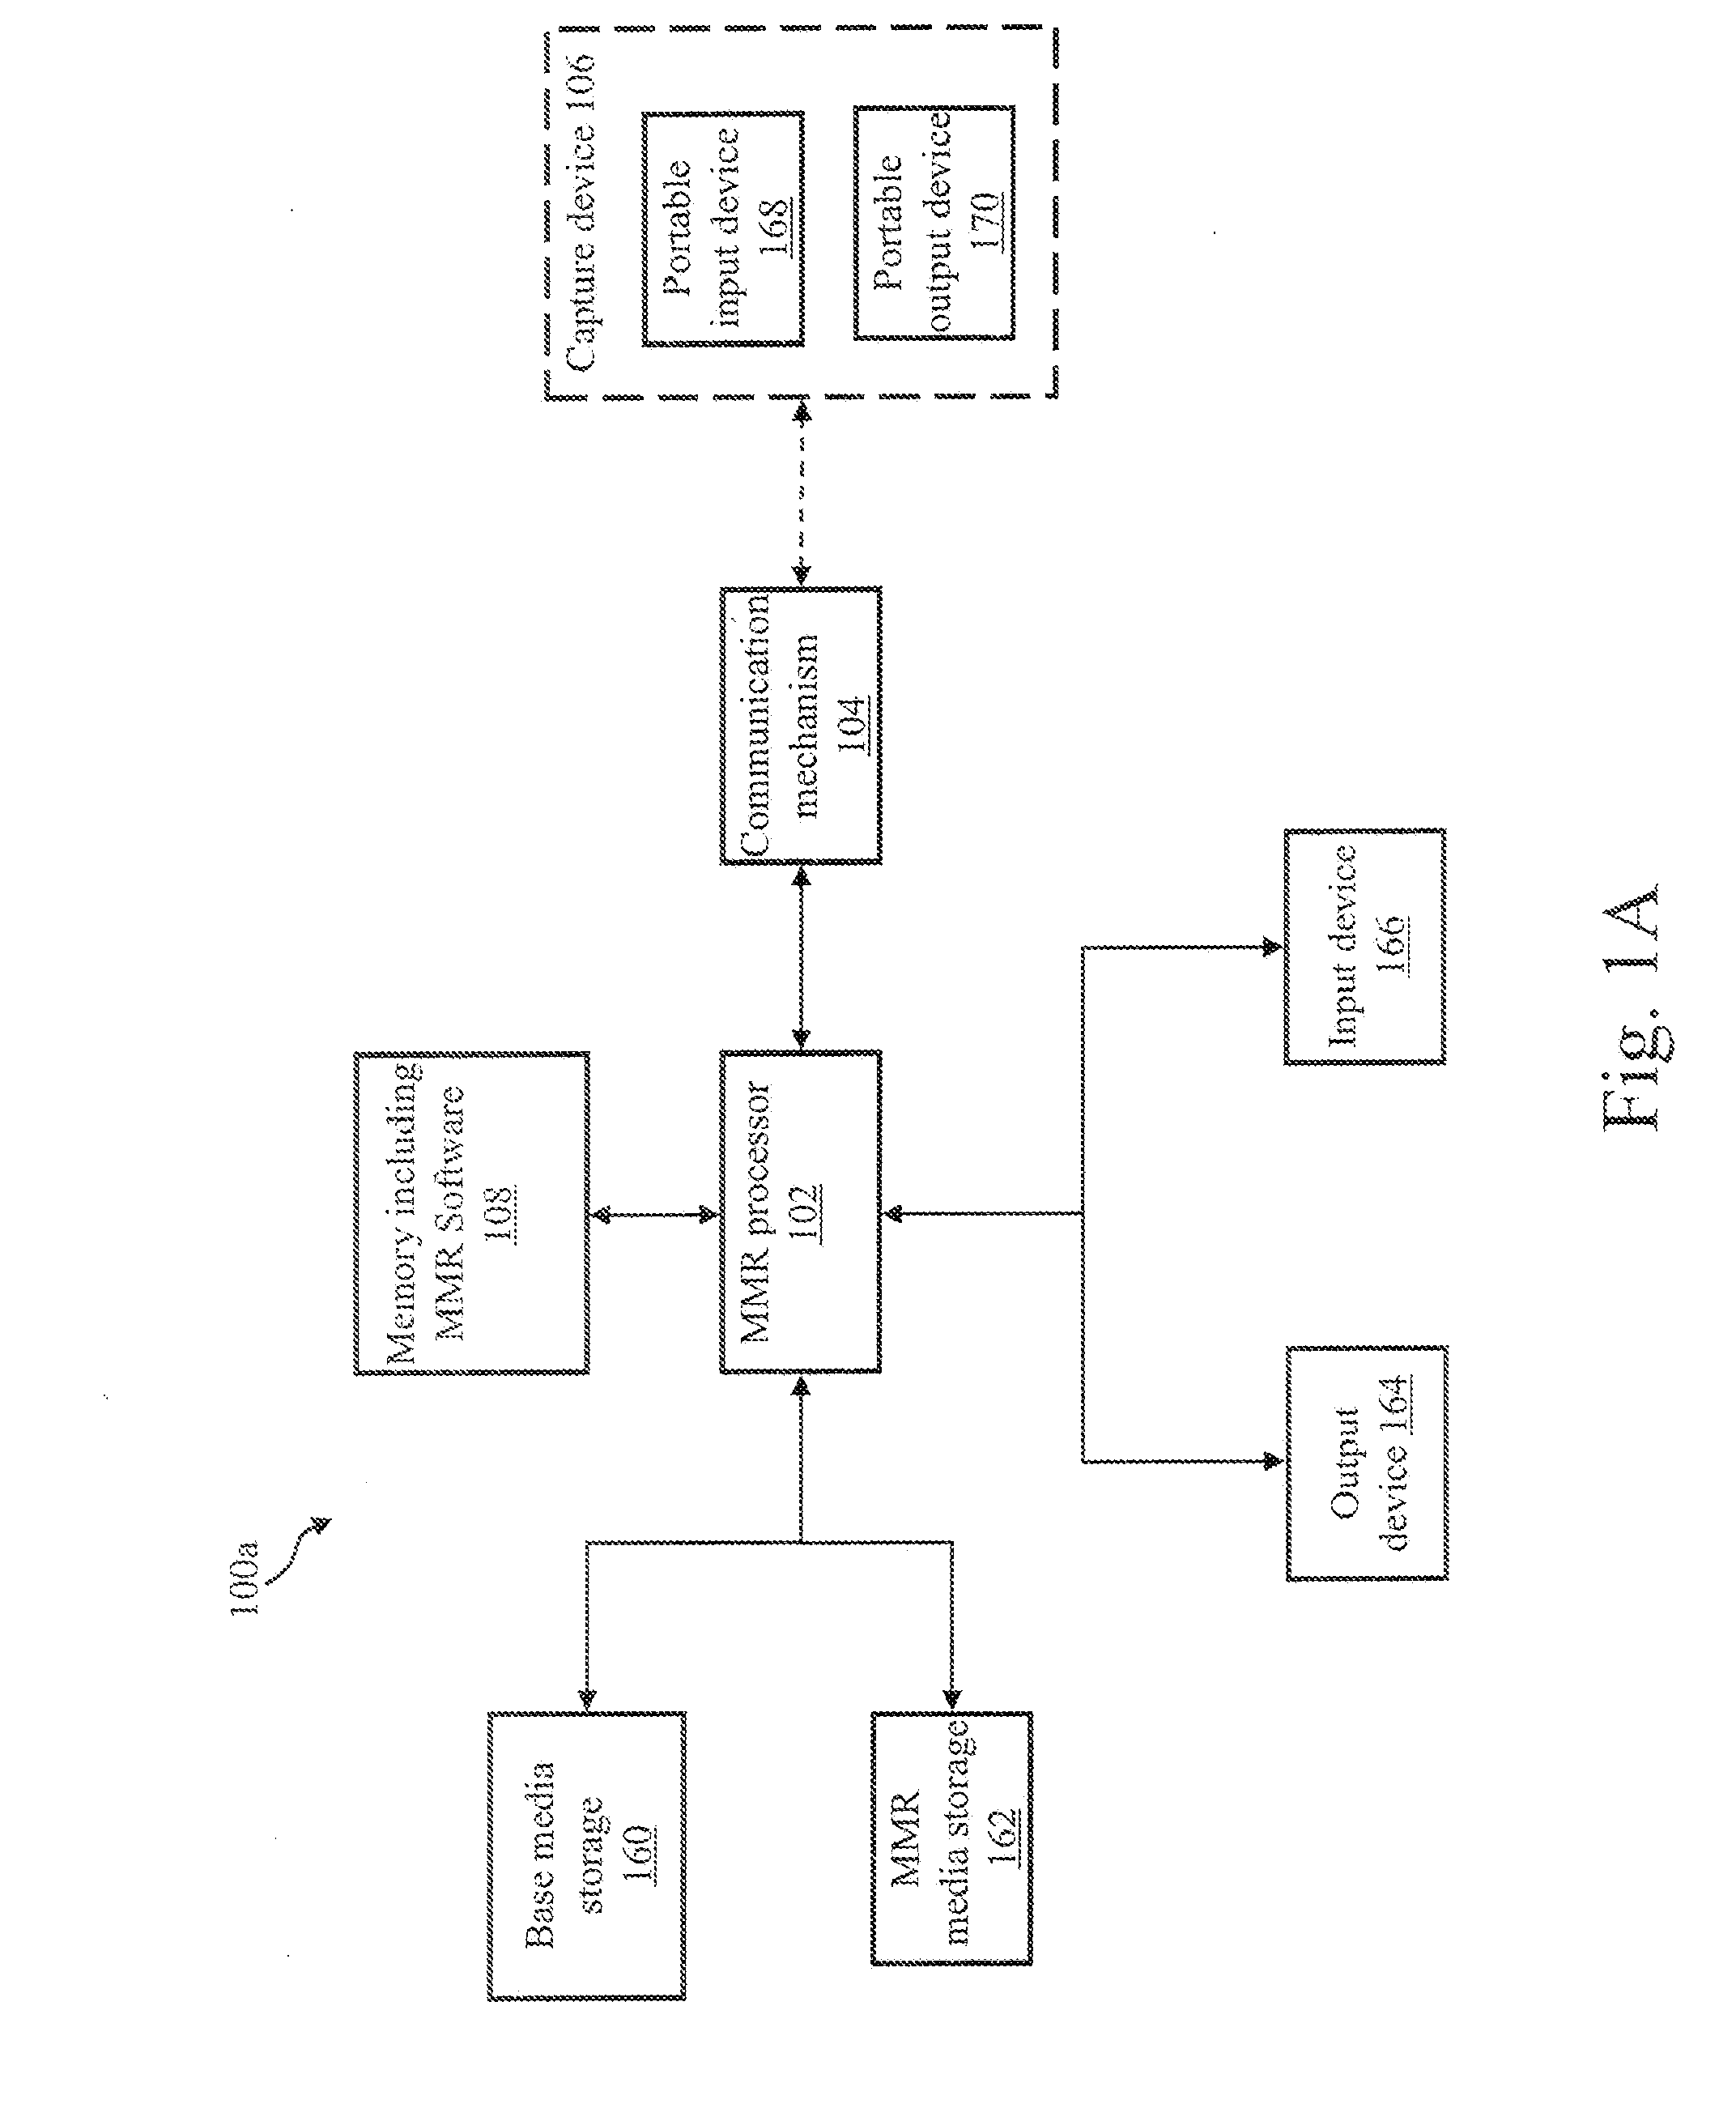 Method and System for Multi-Tier Image Matching in a Mixed Media Environment